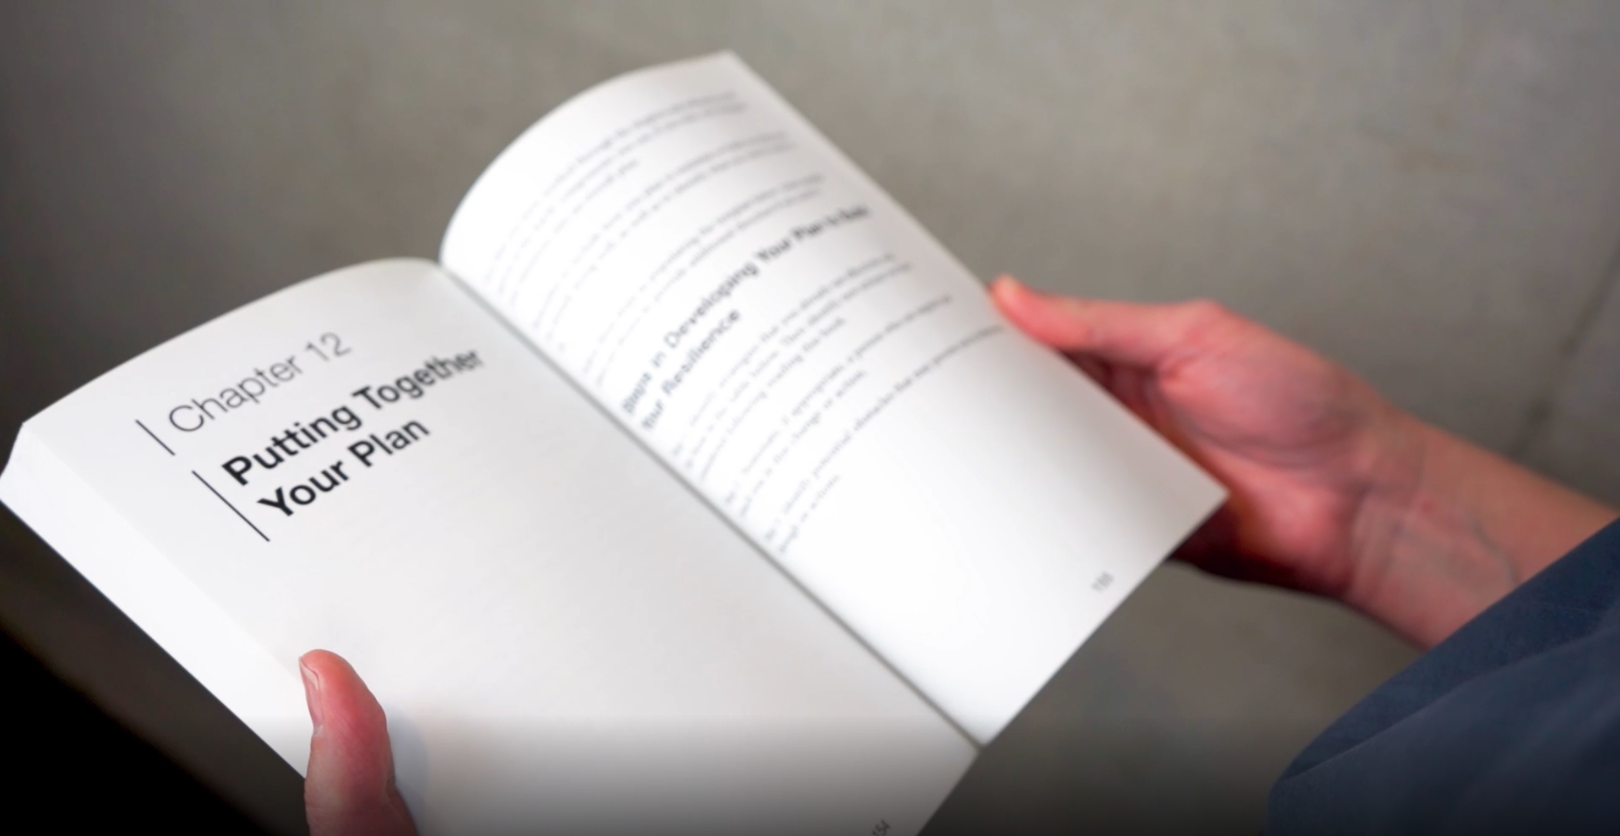 View of individual reading a book, on the left page contents include "Chapter 12 - Putting together your plan".